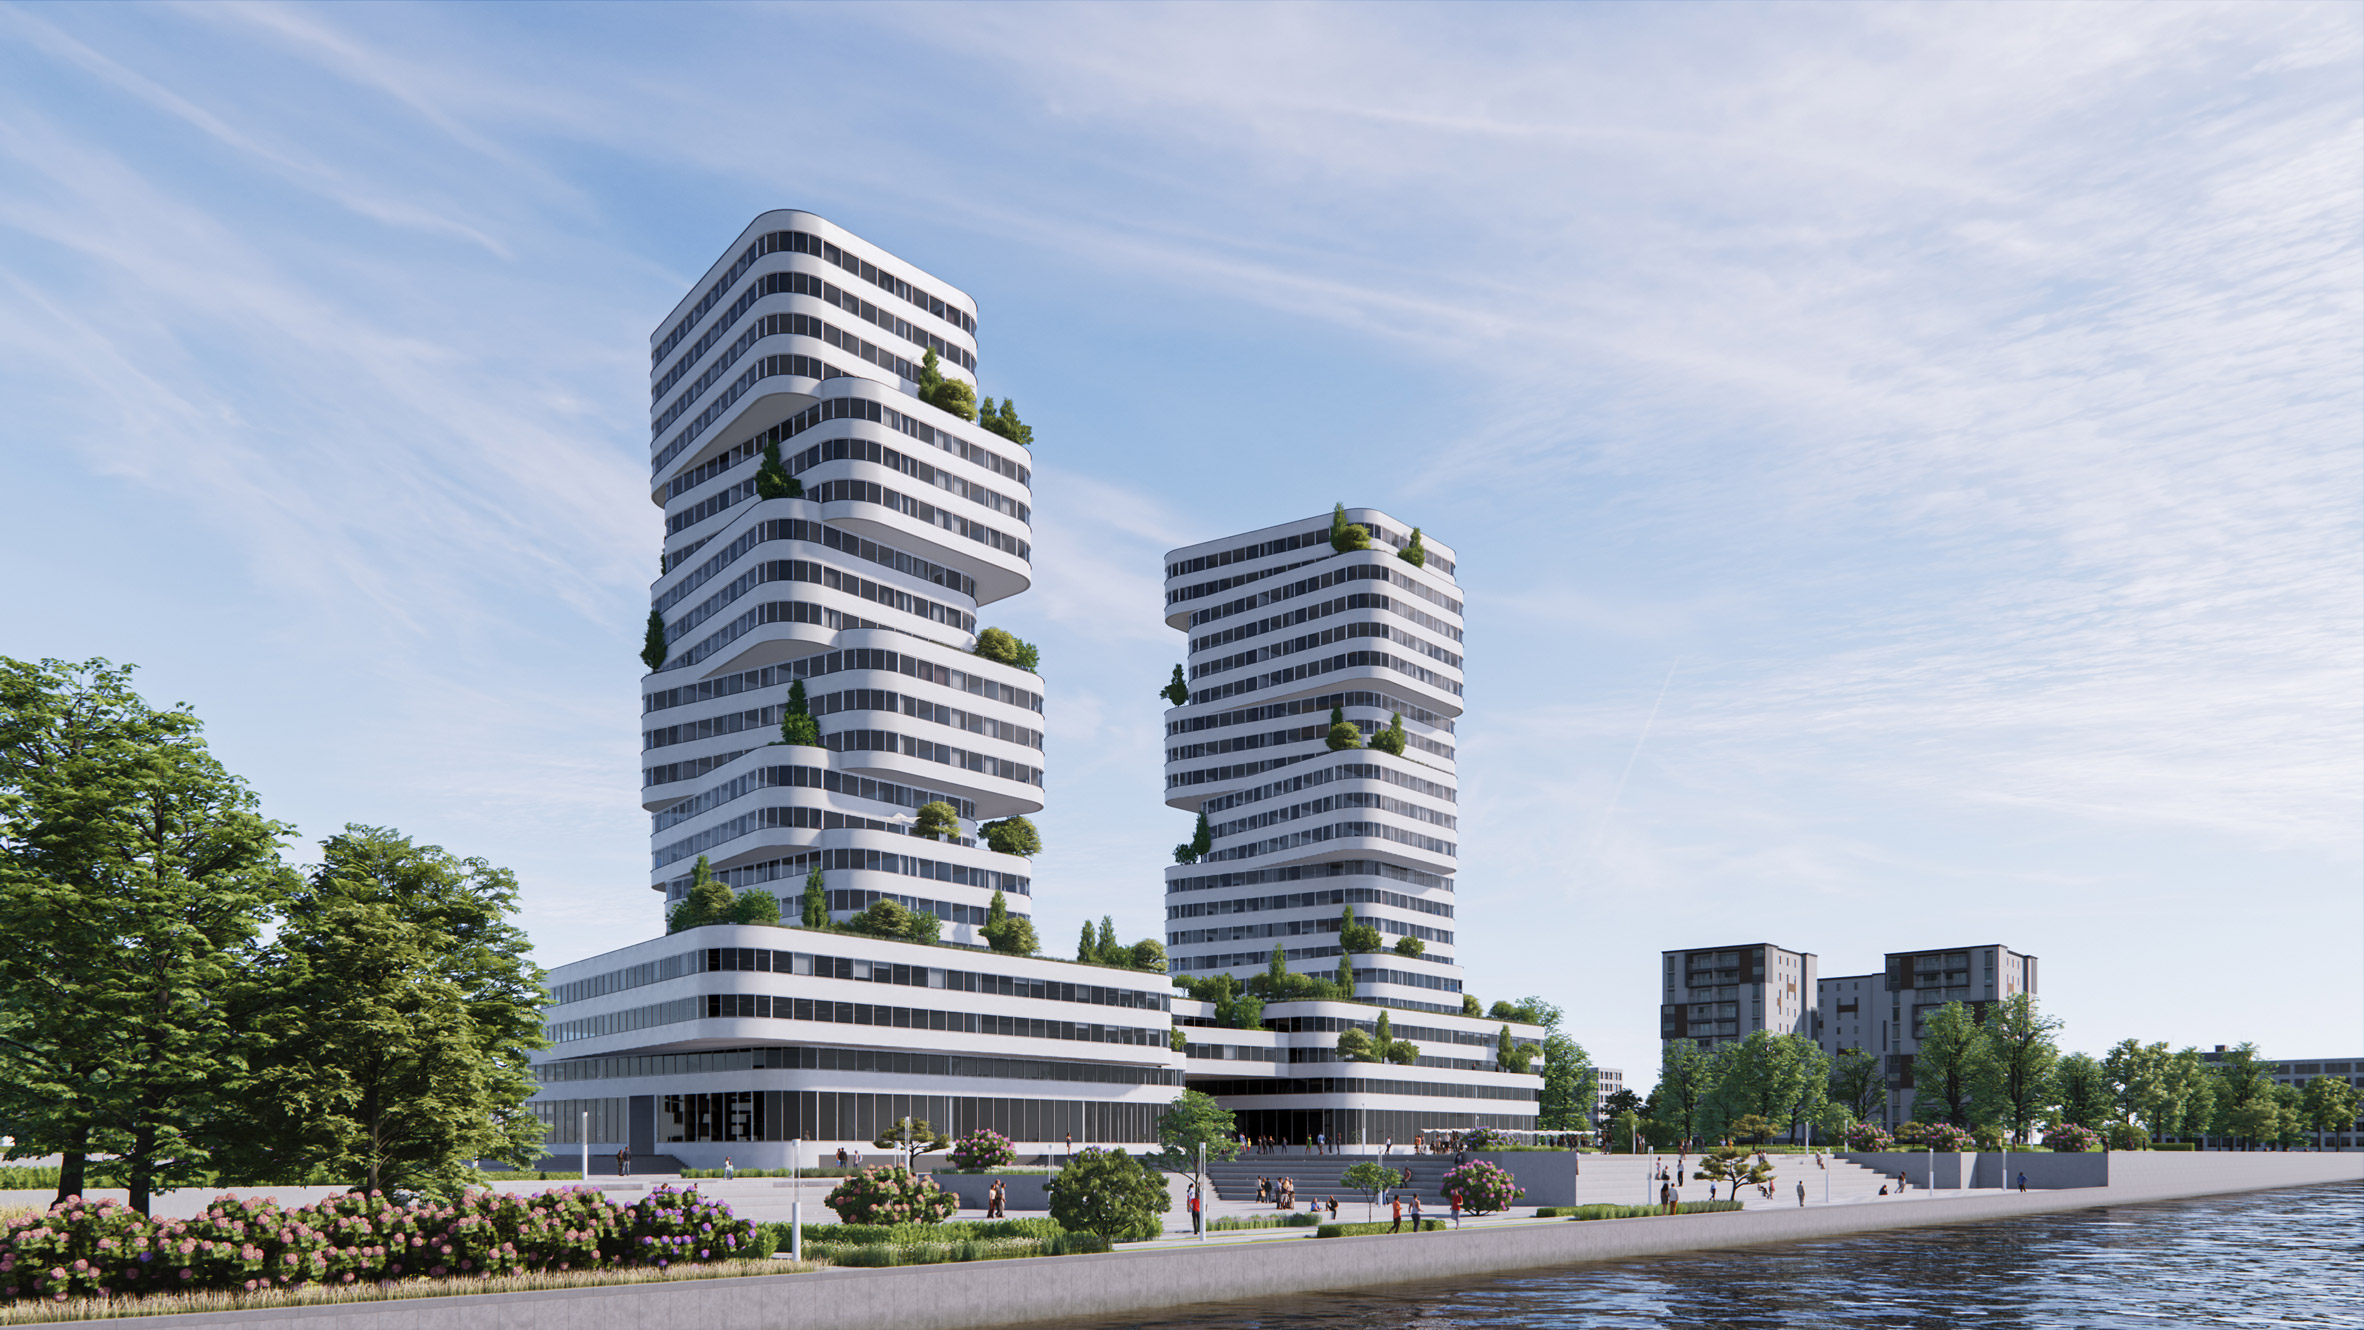 An architectural visualisation of a pair of towers